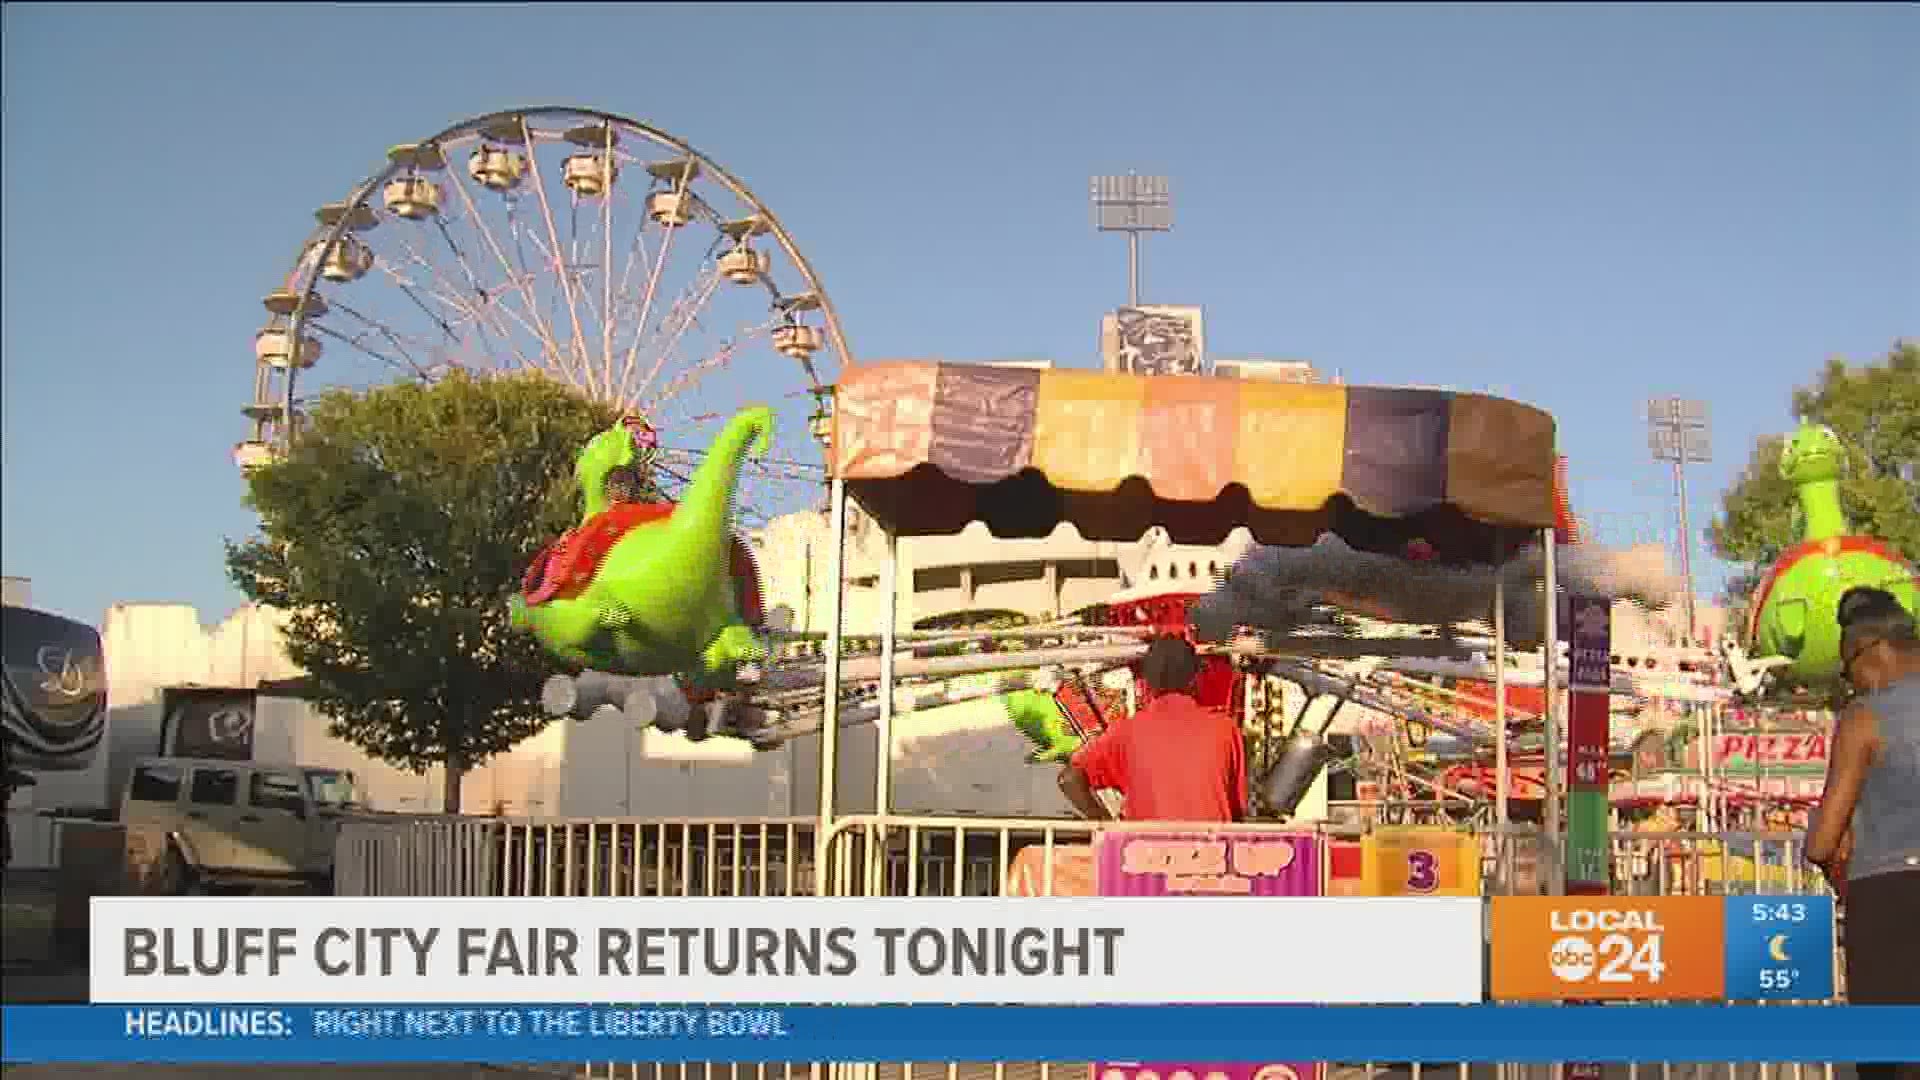 The first fair opens in Tennessee since the start of the pandemic